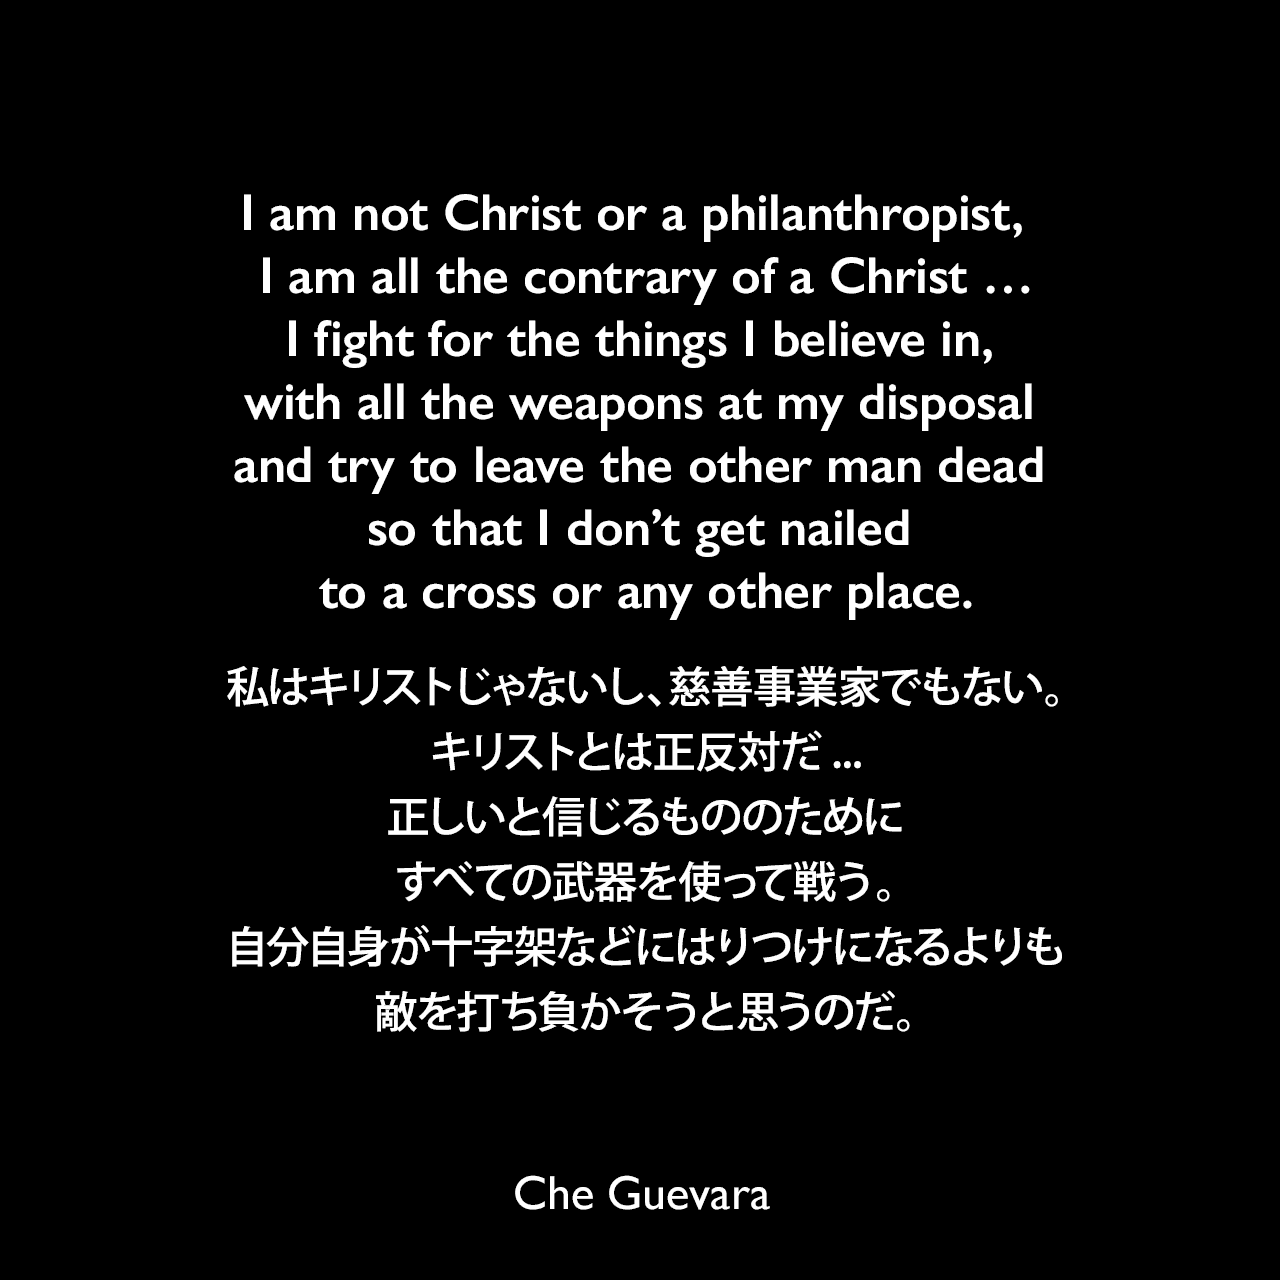 I am not Christ or a philanthropist,  I am all the contrary of a Christ …I fight for the things I believe in, with all the weapons at my disposal and try to leave the other man dead so that I don’t get nailed to a cross or any other place.私はキリストじゃないし、慈善事業家でもない。キリストとは正反対だ...正しいと信じるもののために、すべての武器を使って戦う。自分自身が十字架などにはりつけになるよりも、敵を打ち負かそうと思うのだ。Che Guevara